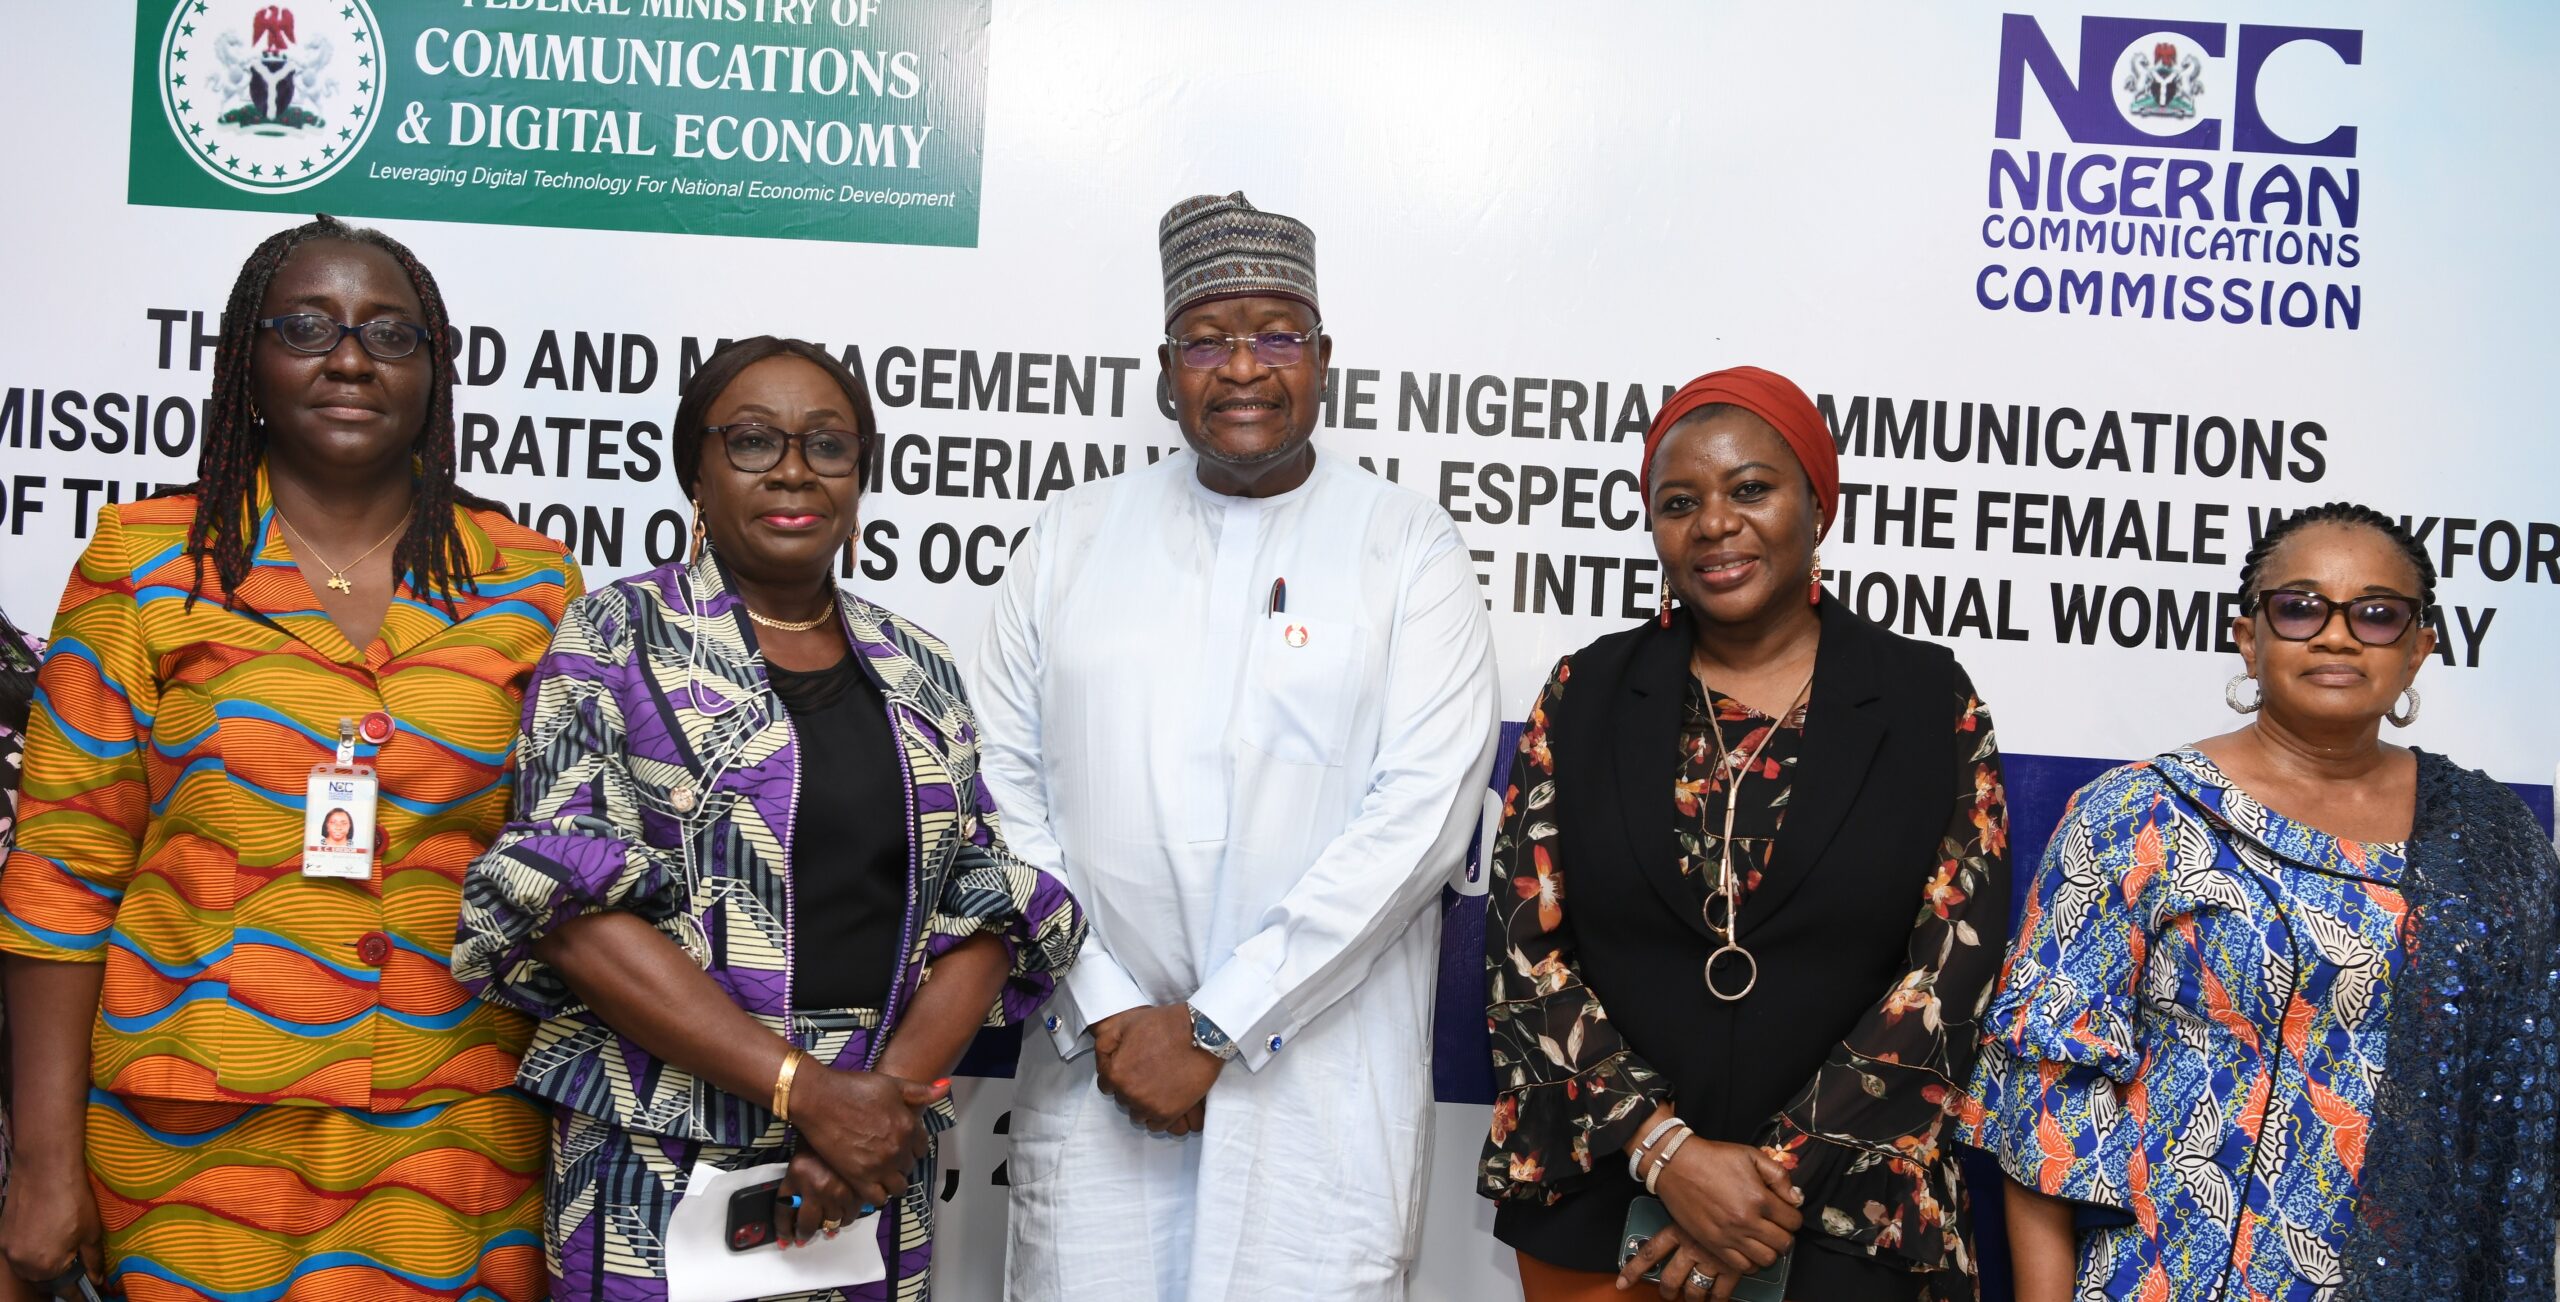 NCC Committed To Promoting Gender Equality And Inclusive Participation